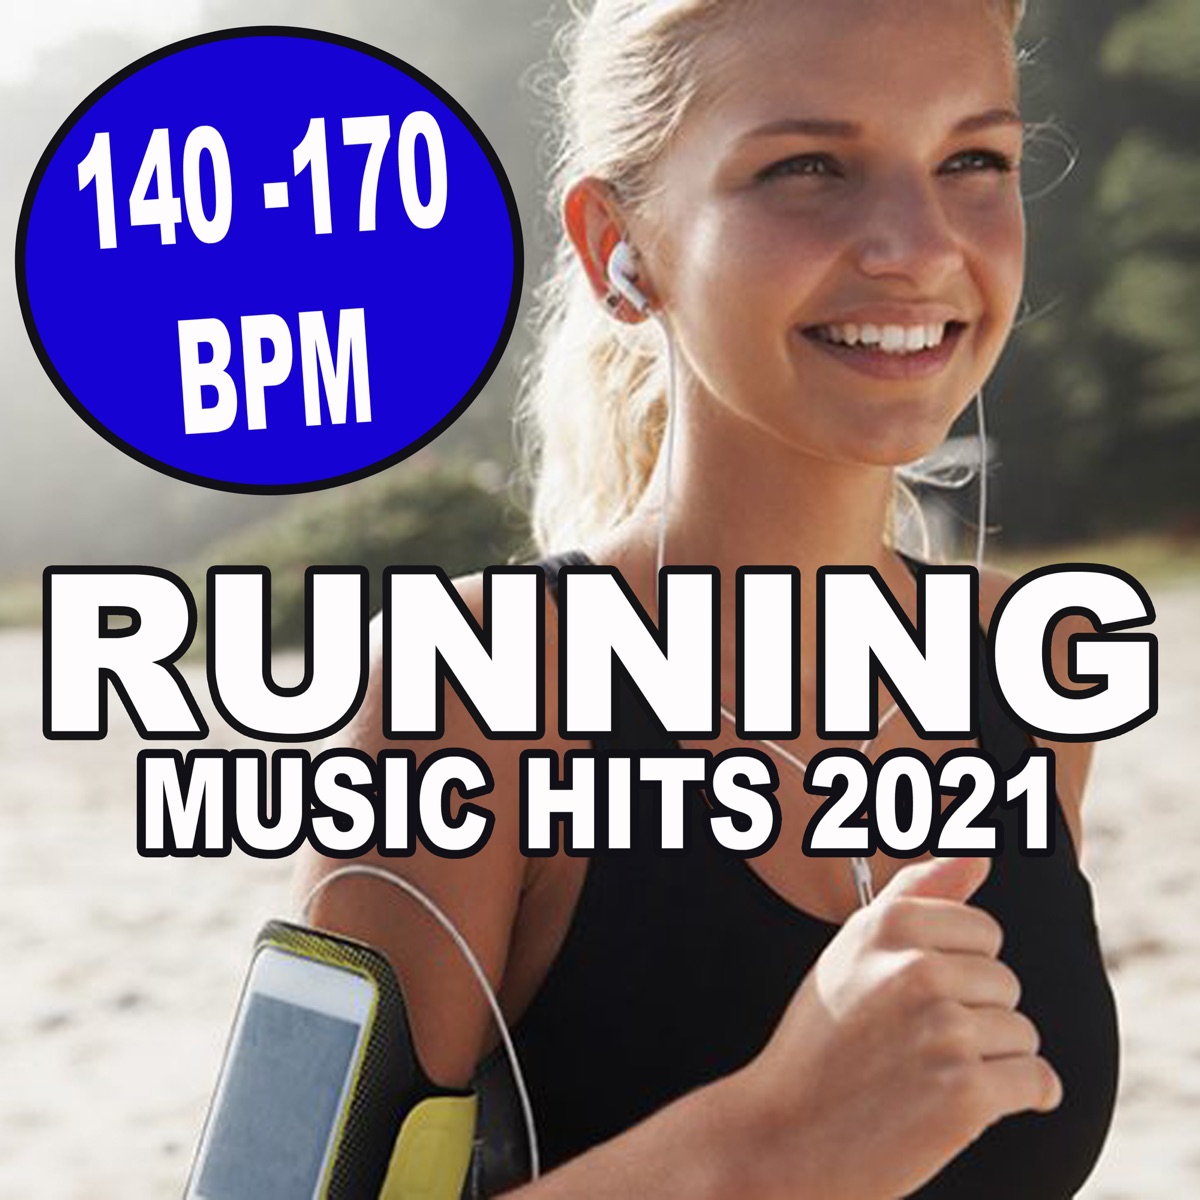 Running Music Hits 2021 - 140-170 Bpm (The Best Motivated Boosting Workout  Playlist That Make Your Workout More Enjoyable to Improve Your Running Pace  with These Tempo Matched Hit Songs) - Album